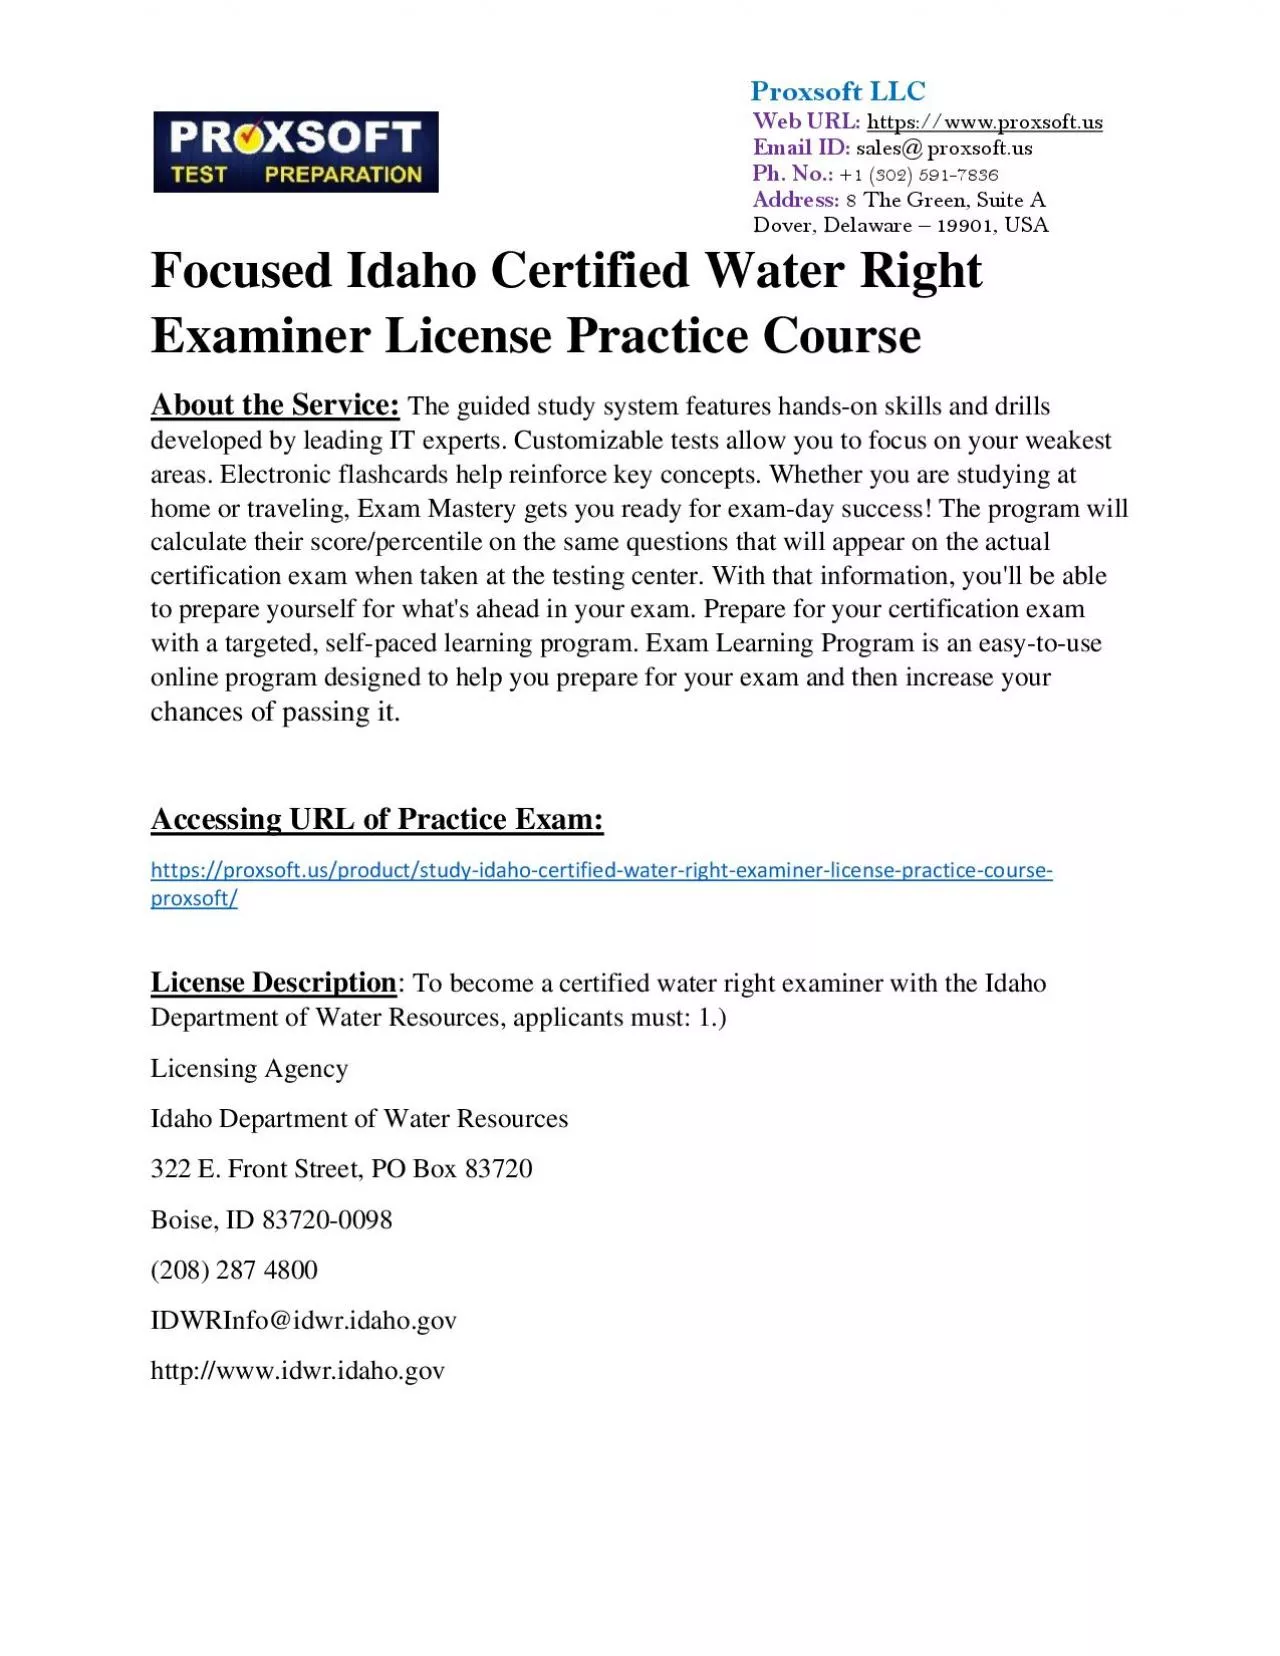 Focused Idaho Certified Water Right Examiner License Practice Course